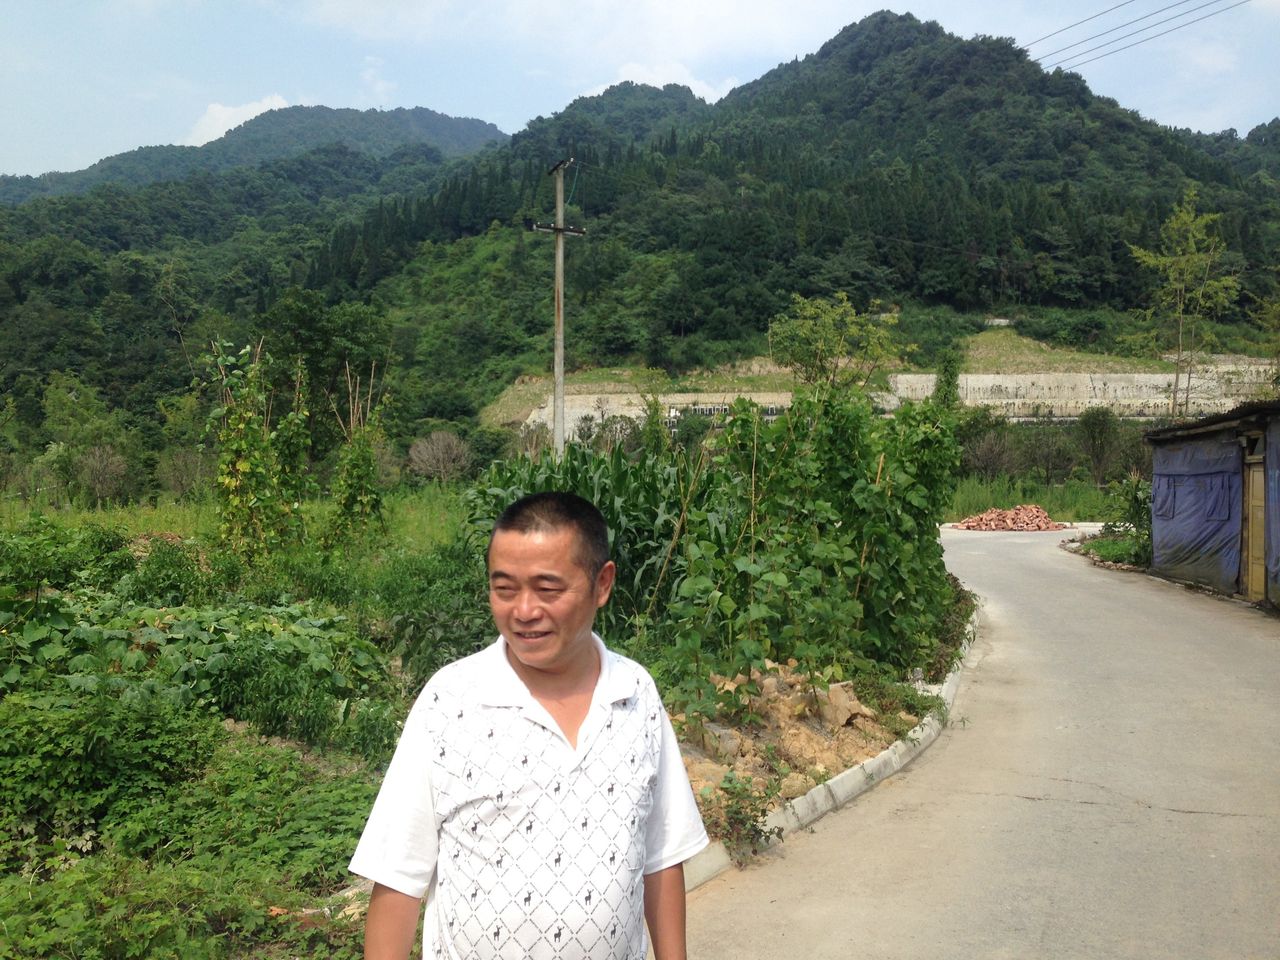 Huang Qi visiting the area affected by the 2008 Wenchuan earthquake.